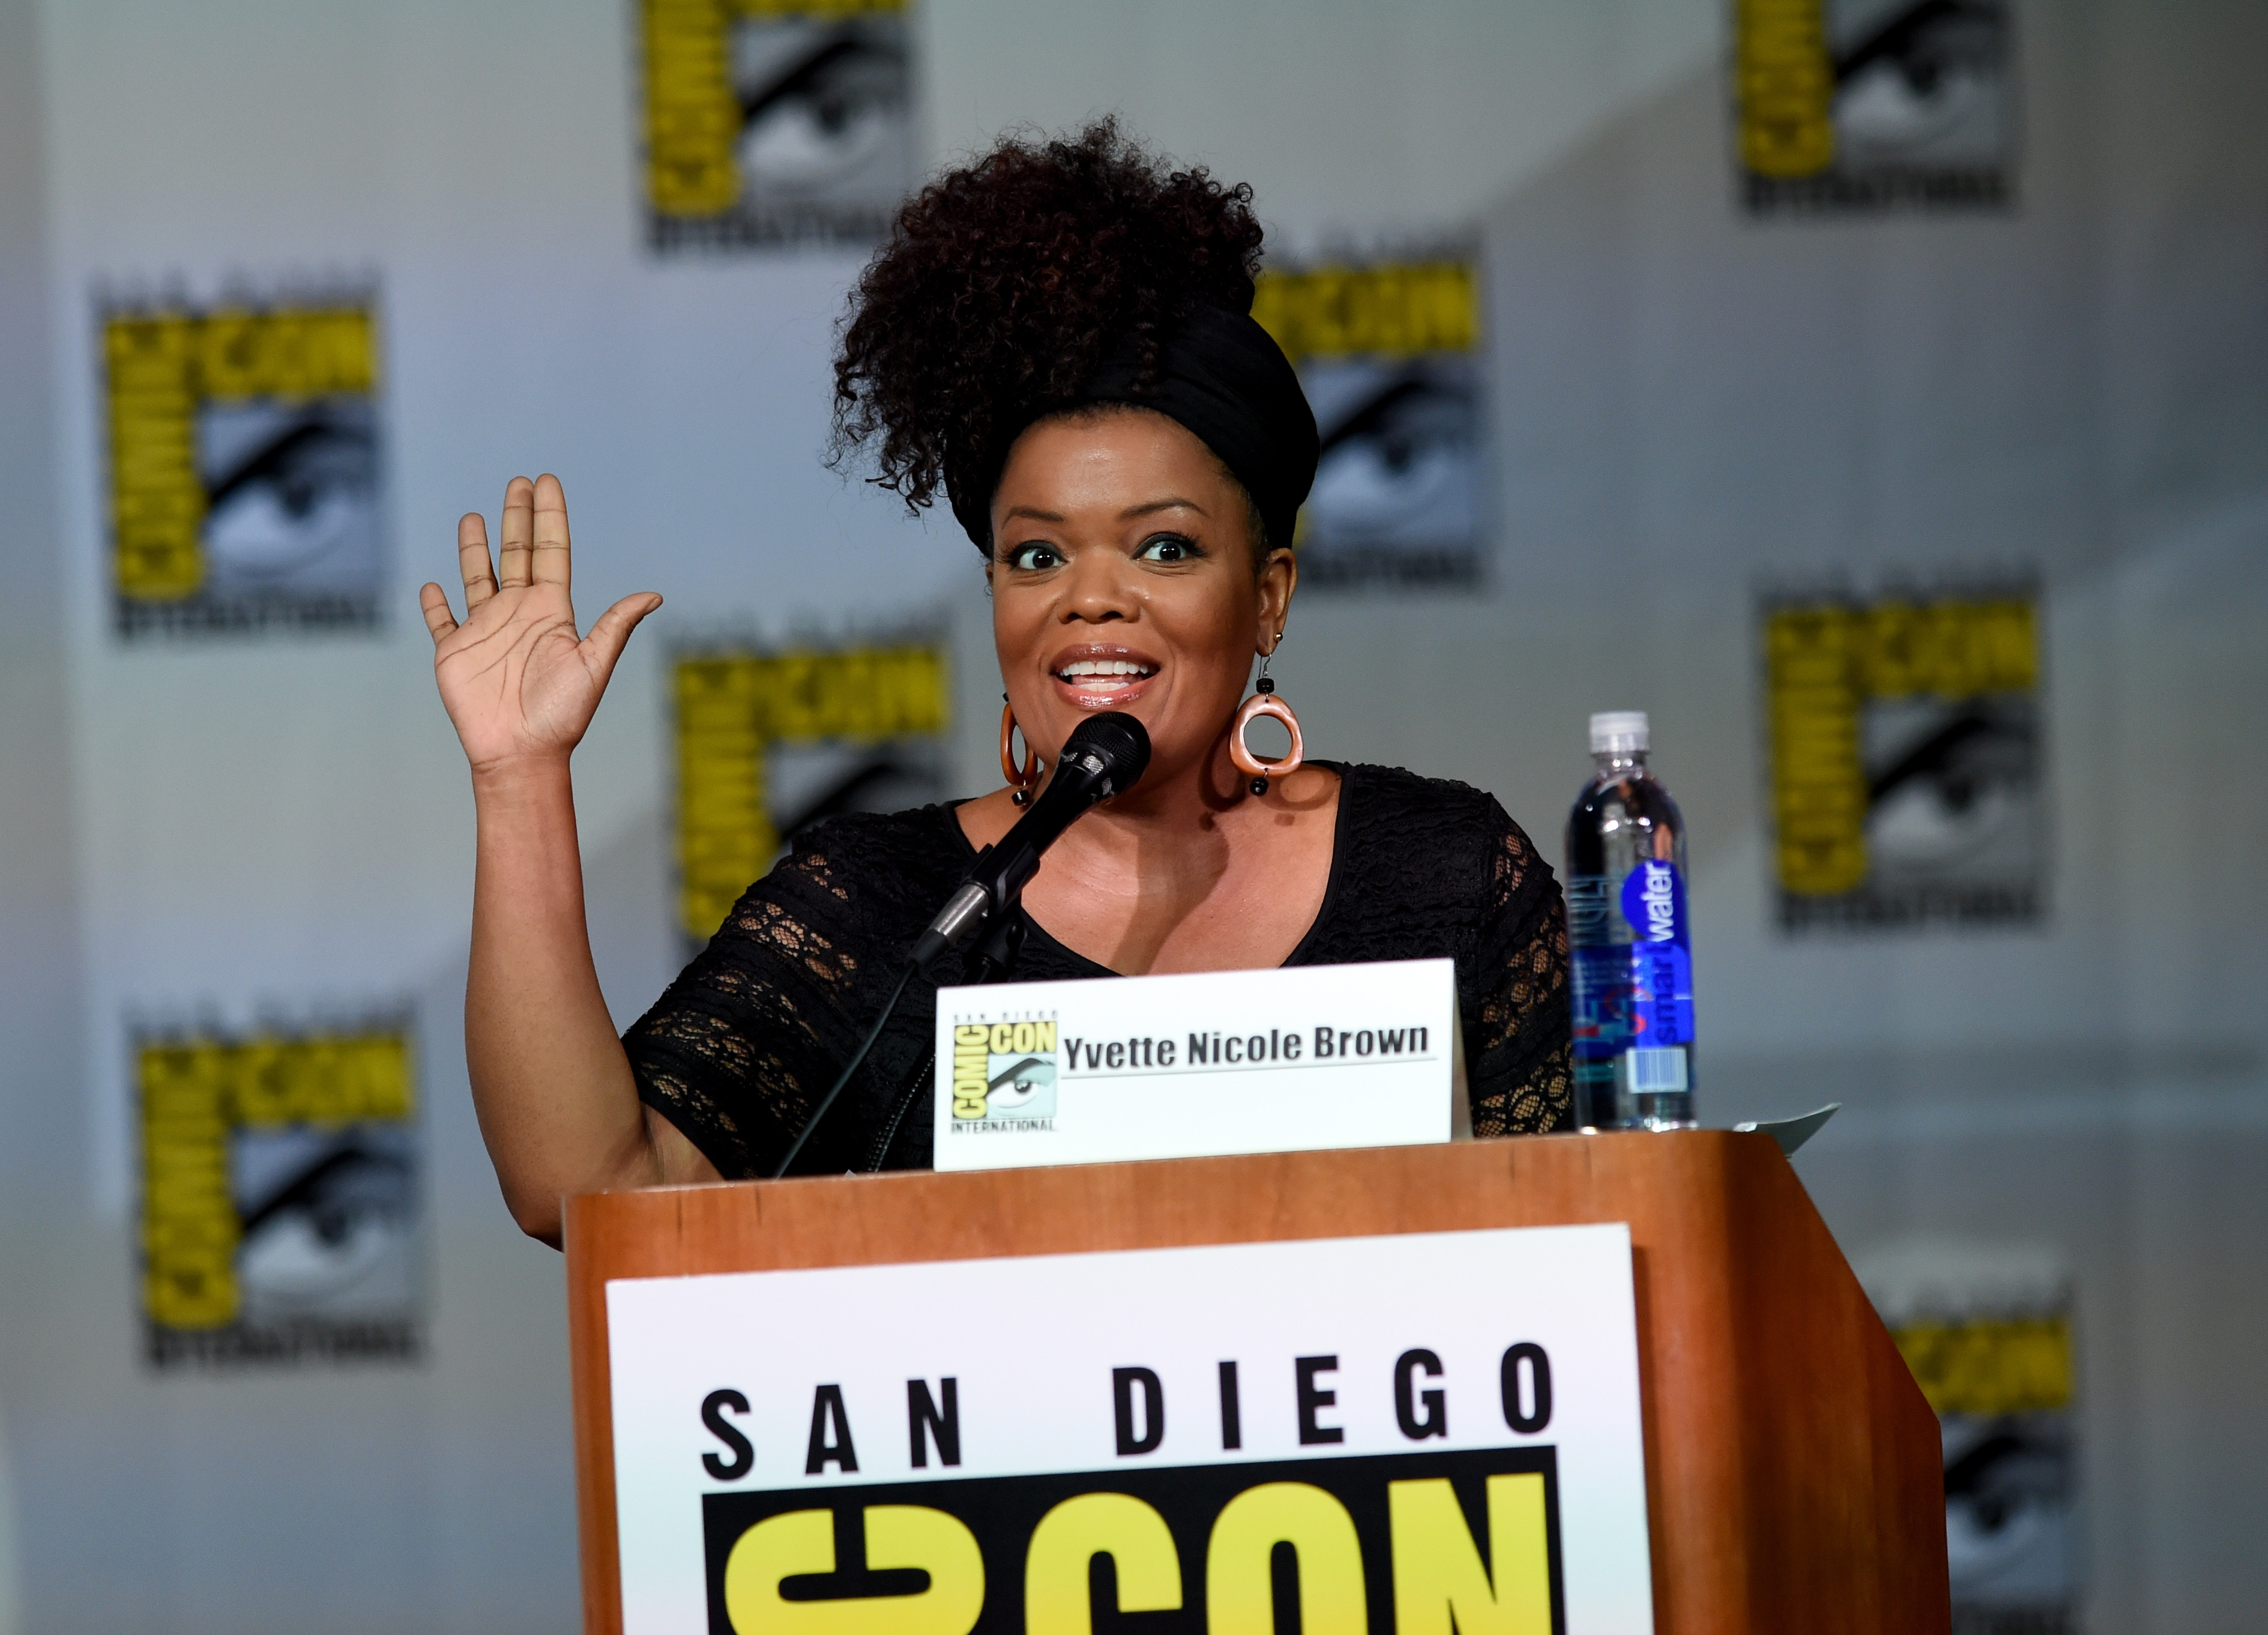 Yvette Nicole Brown Explains How to Moderate a Comic-Con Panel (and Why She's So Good at It)